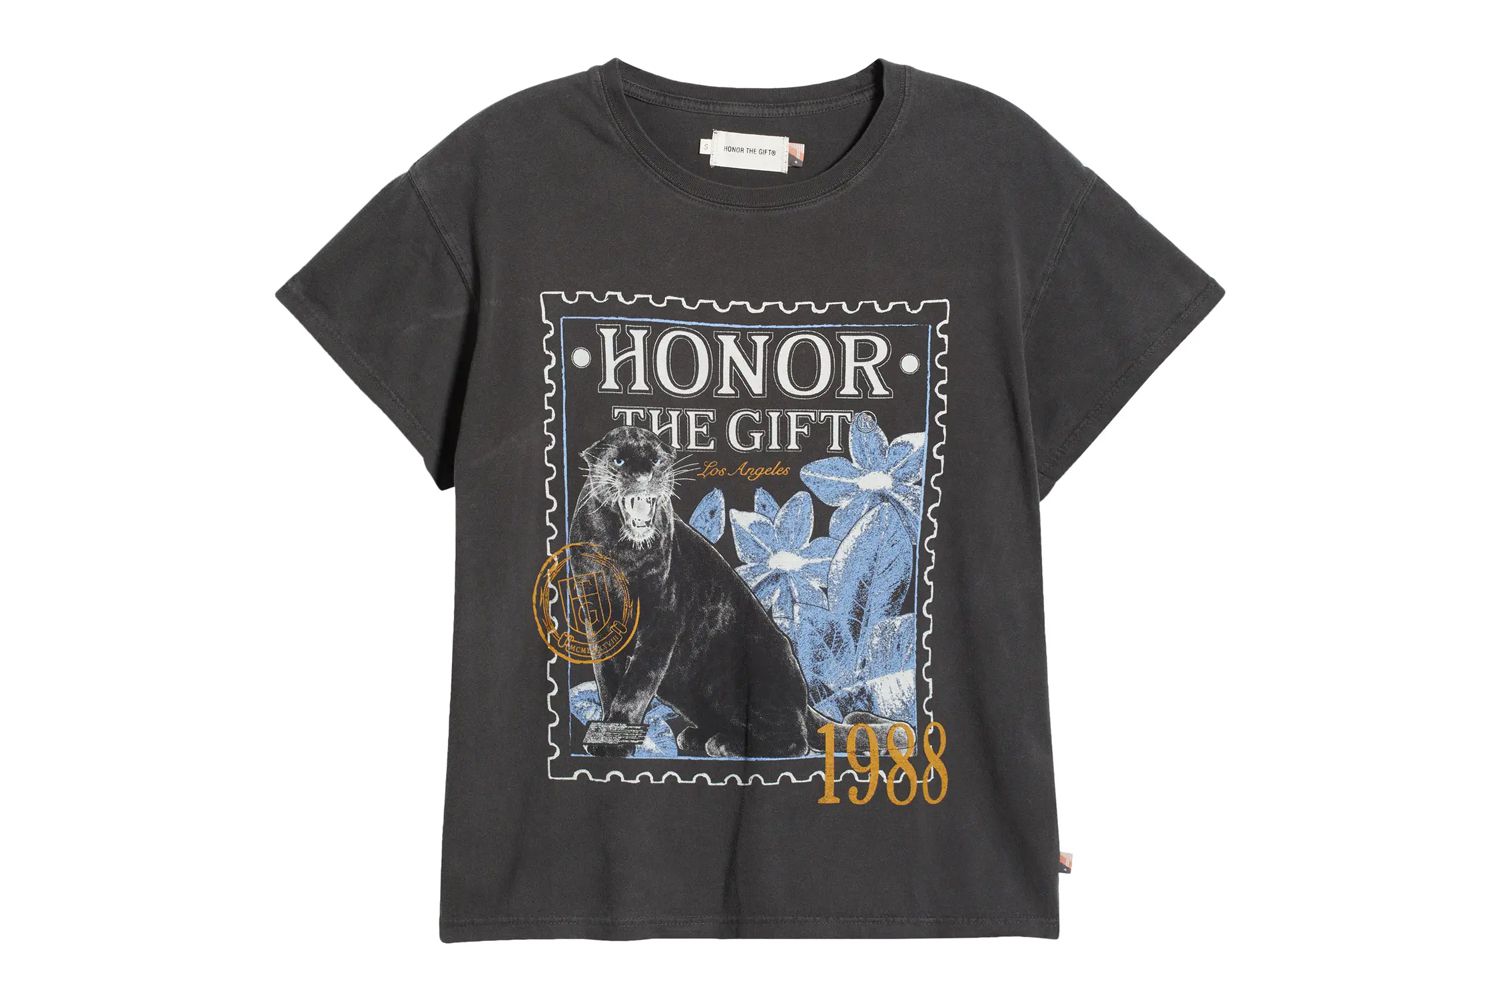 Nordstrom Honor The Gift Stamp 1988 Camiseta gráfica